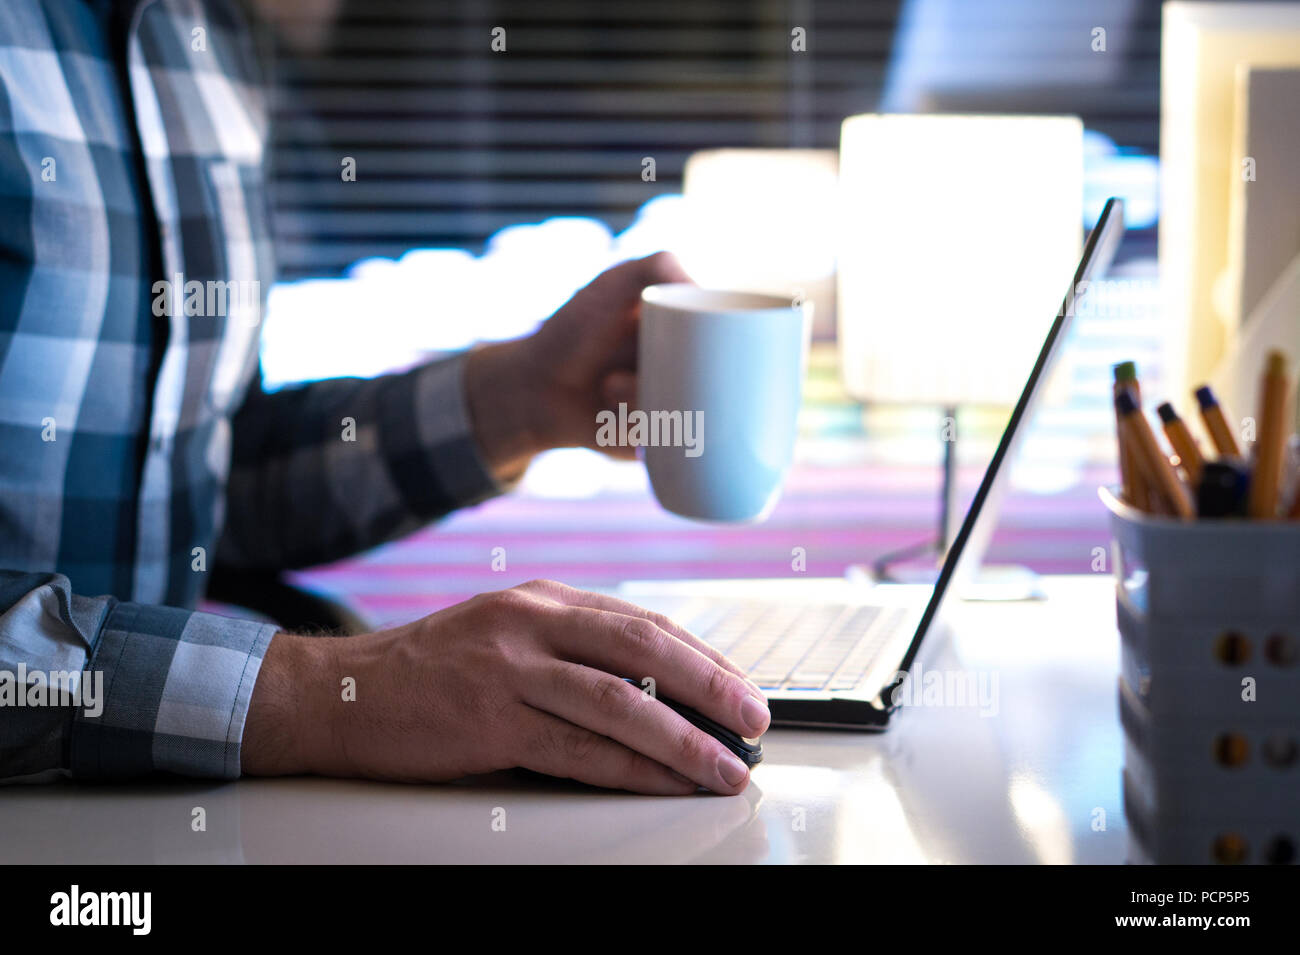 Working late at night and drinking coffee. Man using laptop computer and holding cup or mug in hand in home or office. Stock Photo